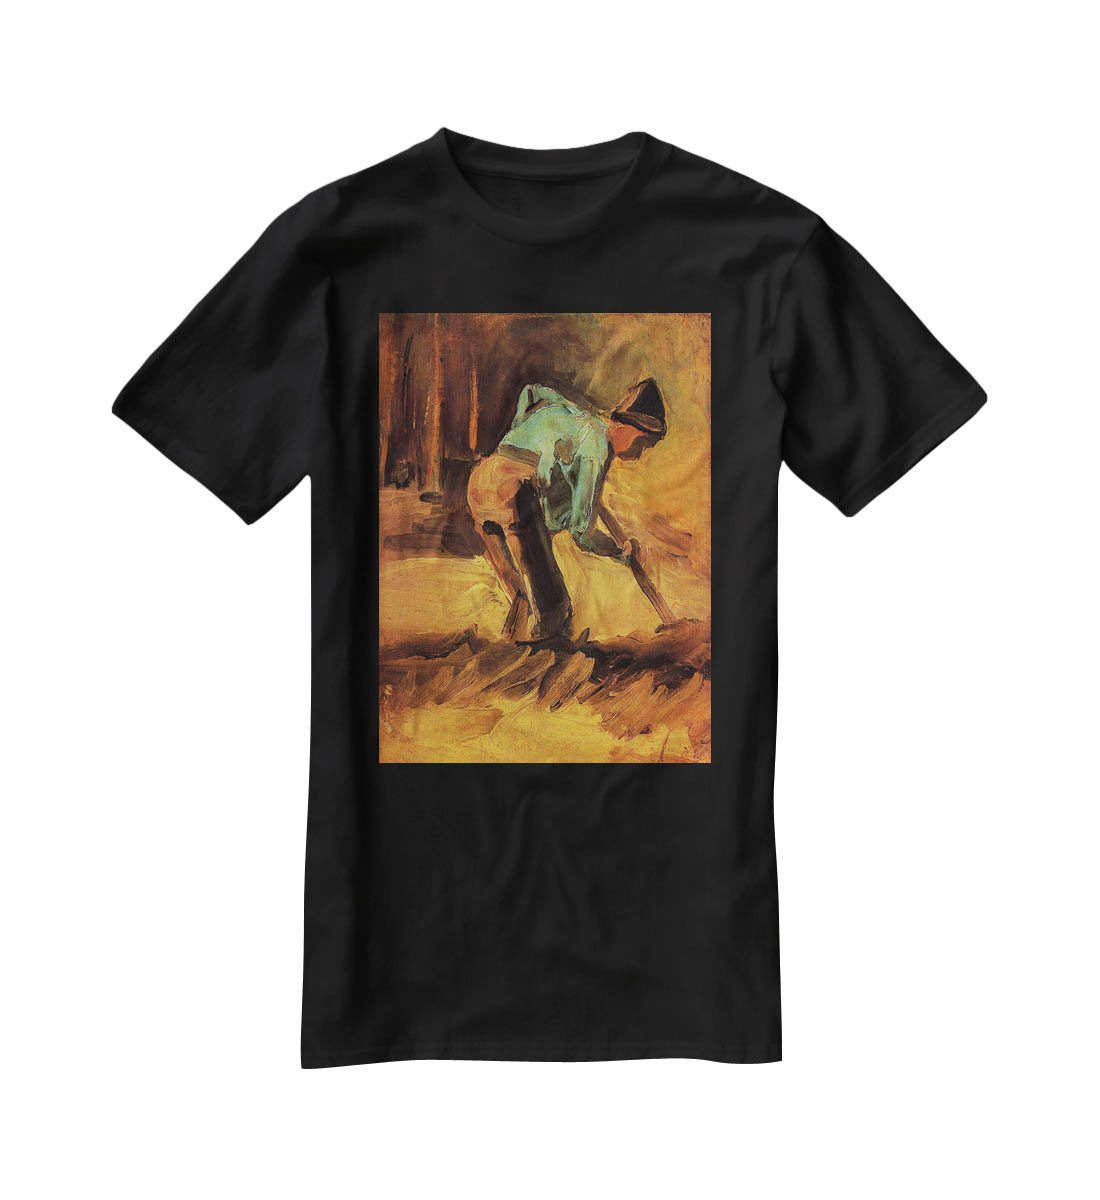 Man Stooping with Stick or Spade by Van Gogh T-Shirt - Canvas Art Rocks - 1